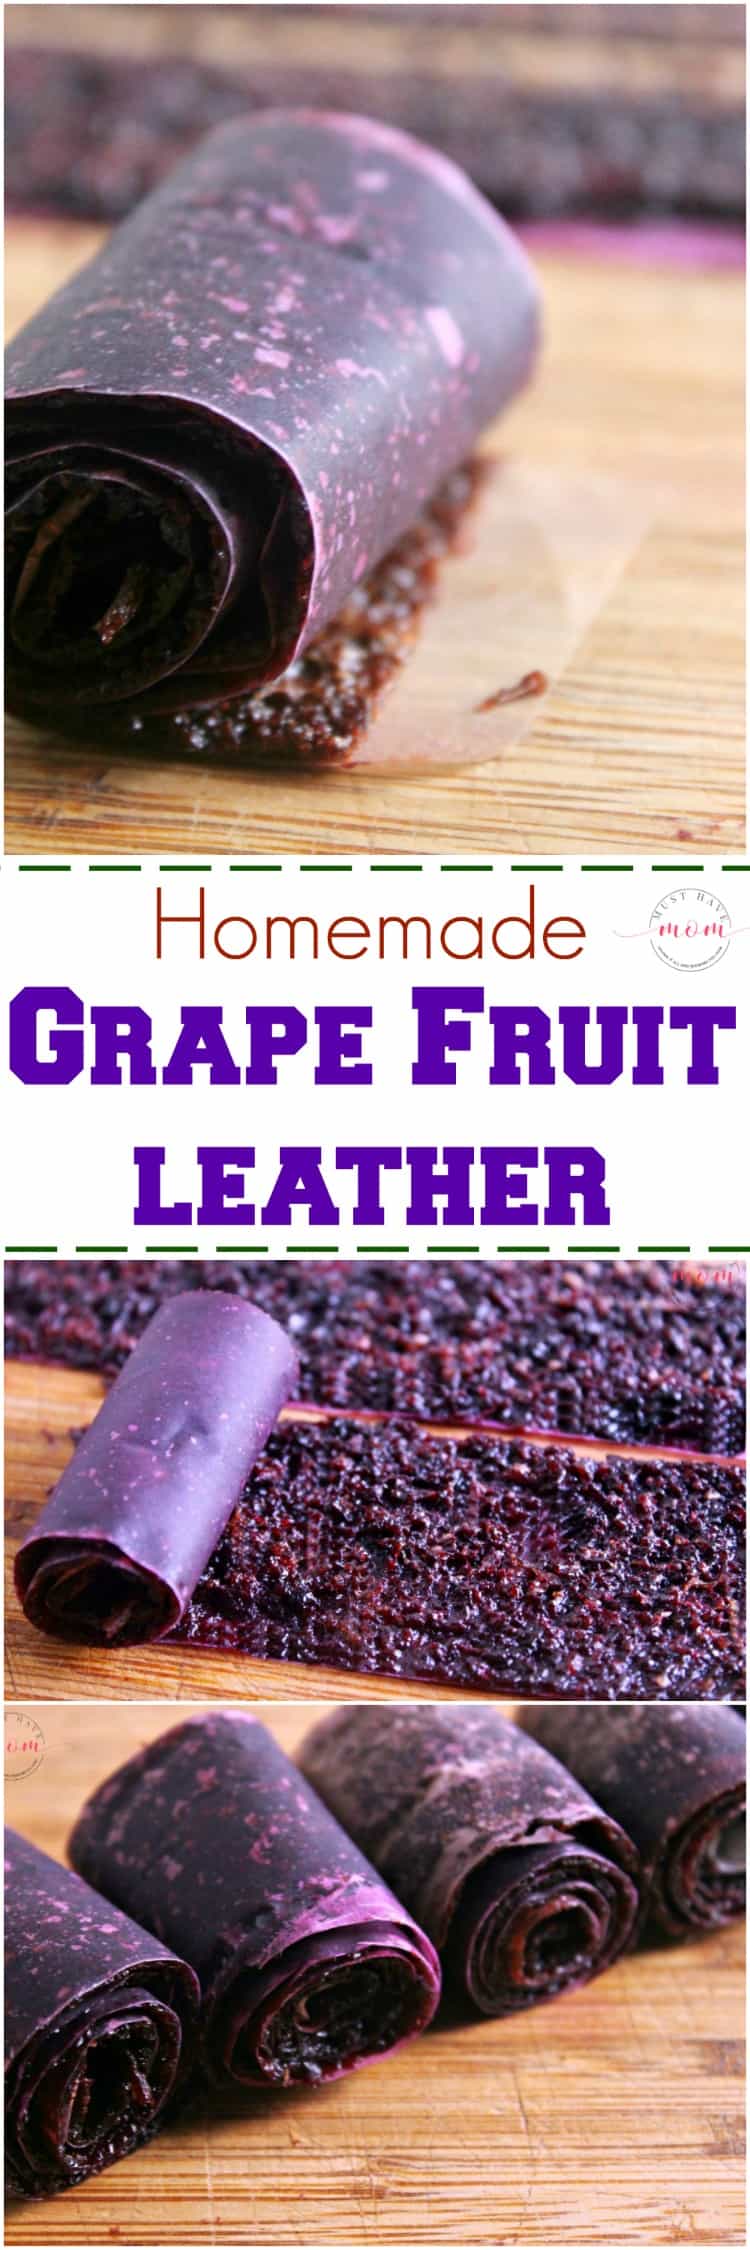 Homemade grape fruit leather recipe - no dehydrator required! Make this grape fruit leather recipe in the oven! Healthy snack idea for kids!